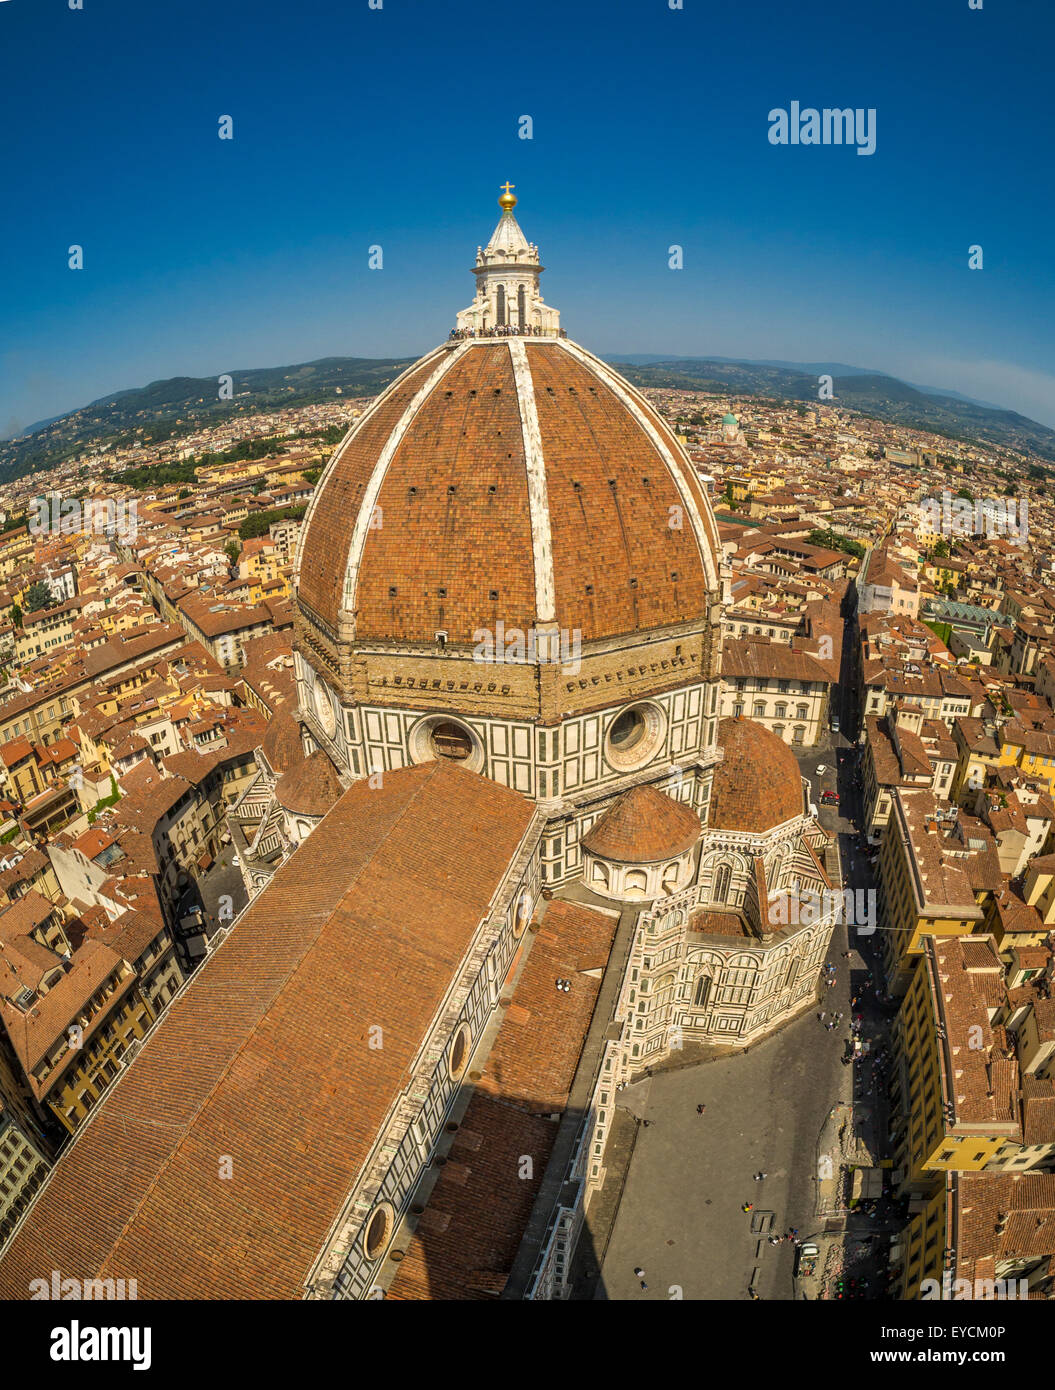 Florence Cathedral or Duomo dome designed by Filippo Brunelleschi. Florence, Italy. Stock Photo